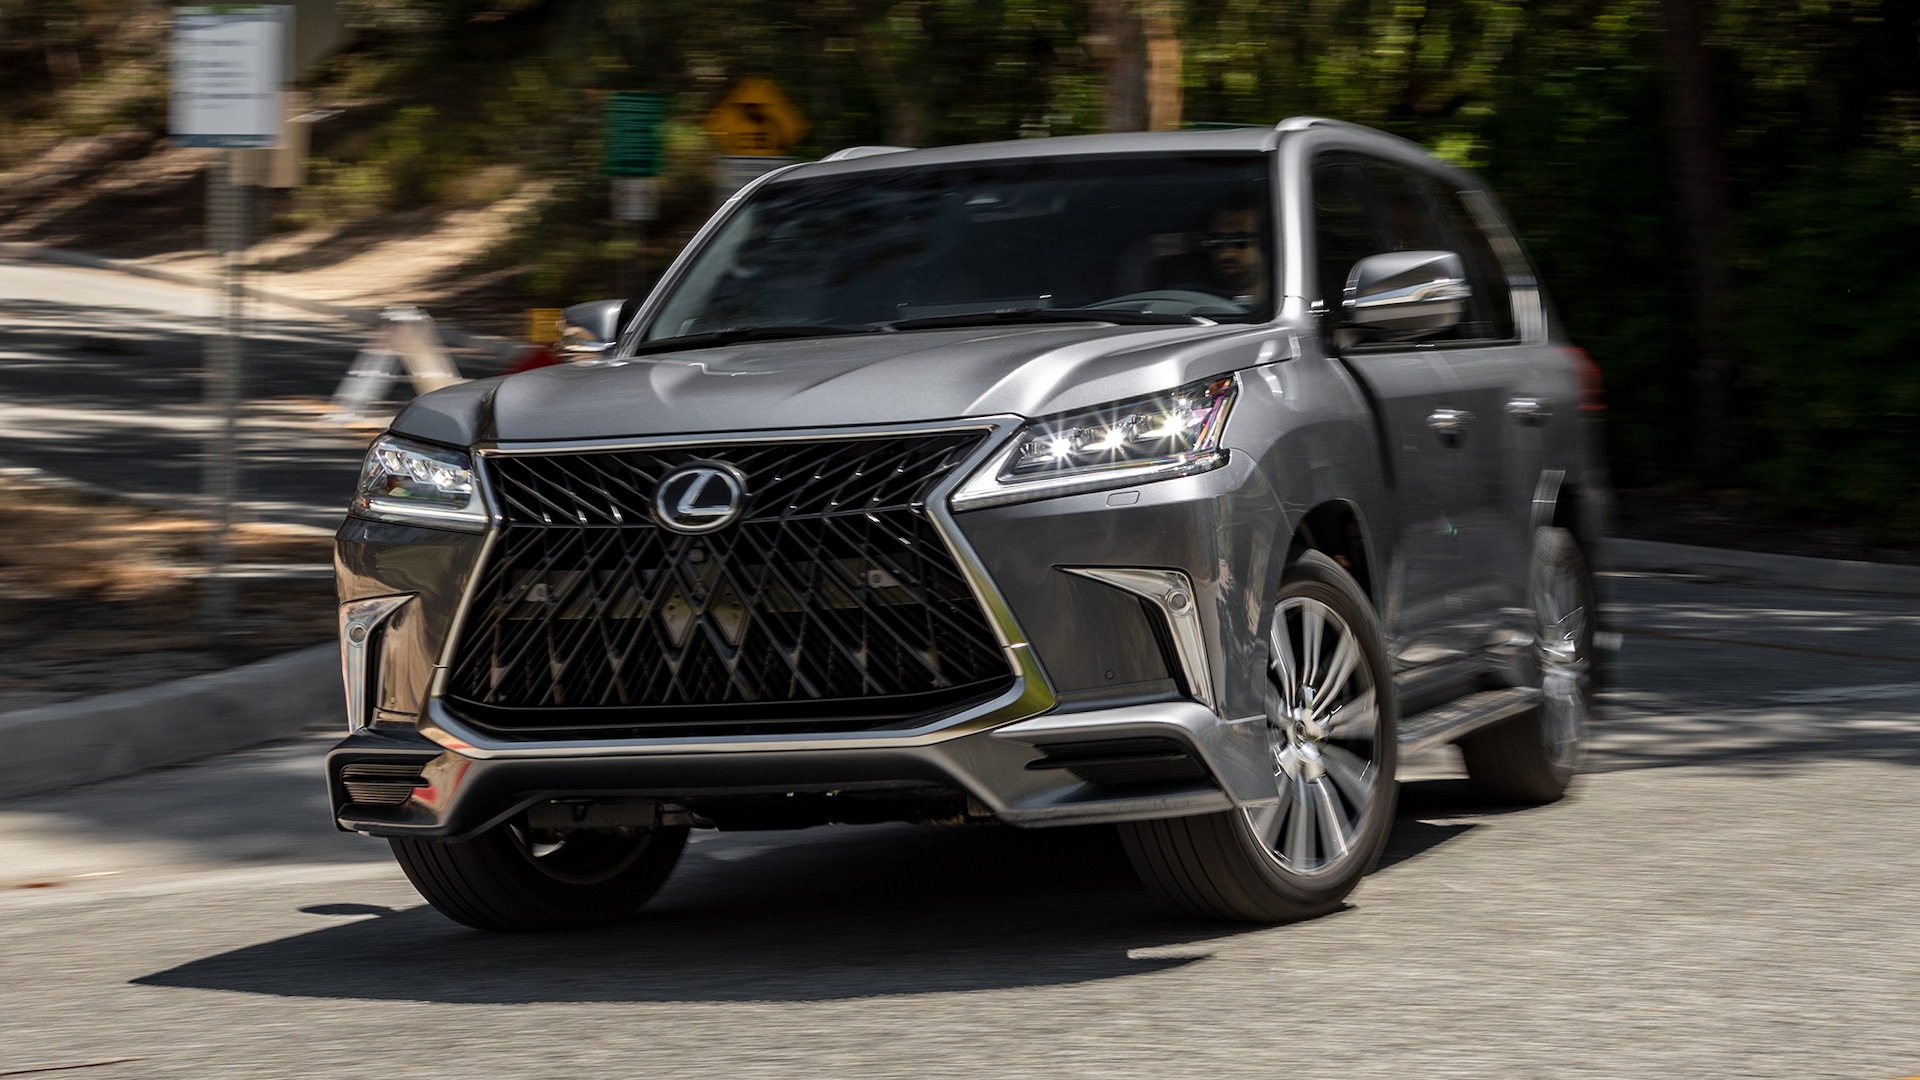 One Week With the 2020 Lexus LX 570—Big Grille, Big SUV